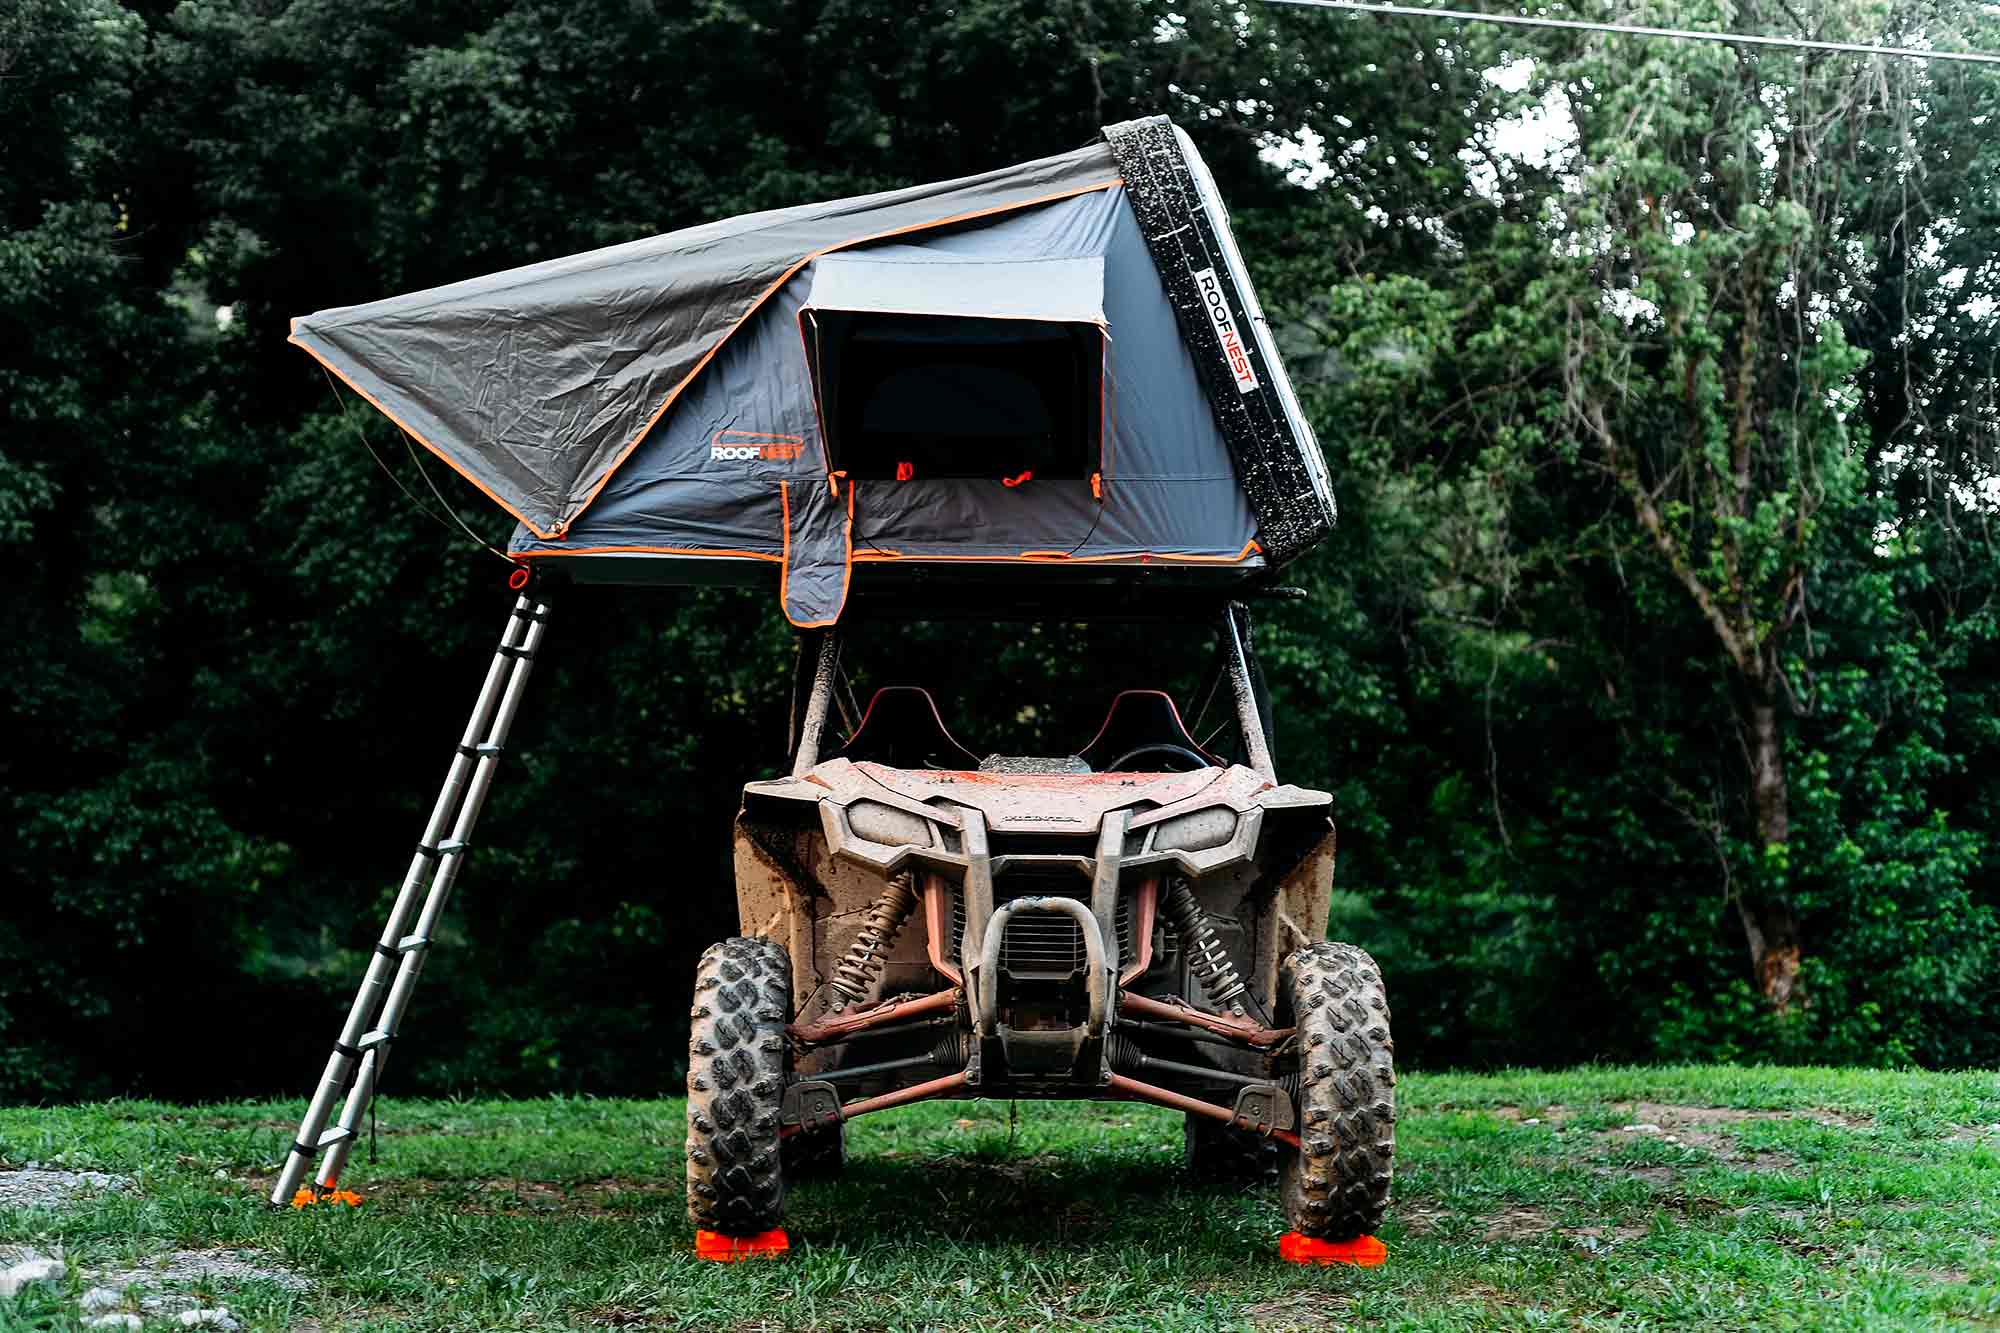 Putting a Roofnest Tent on the Roof of a Honda Talon 1000X